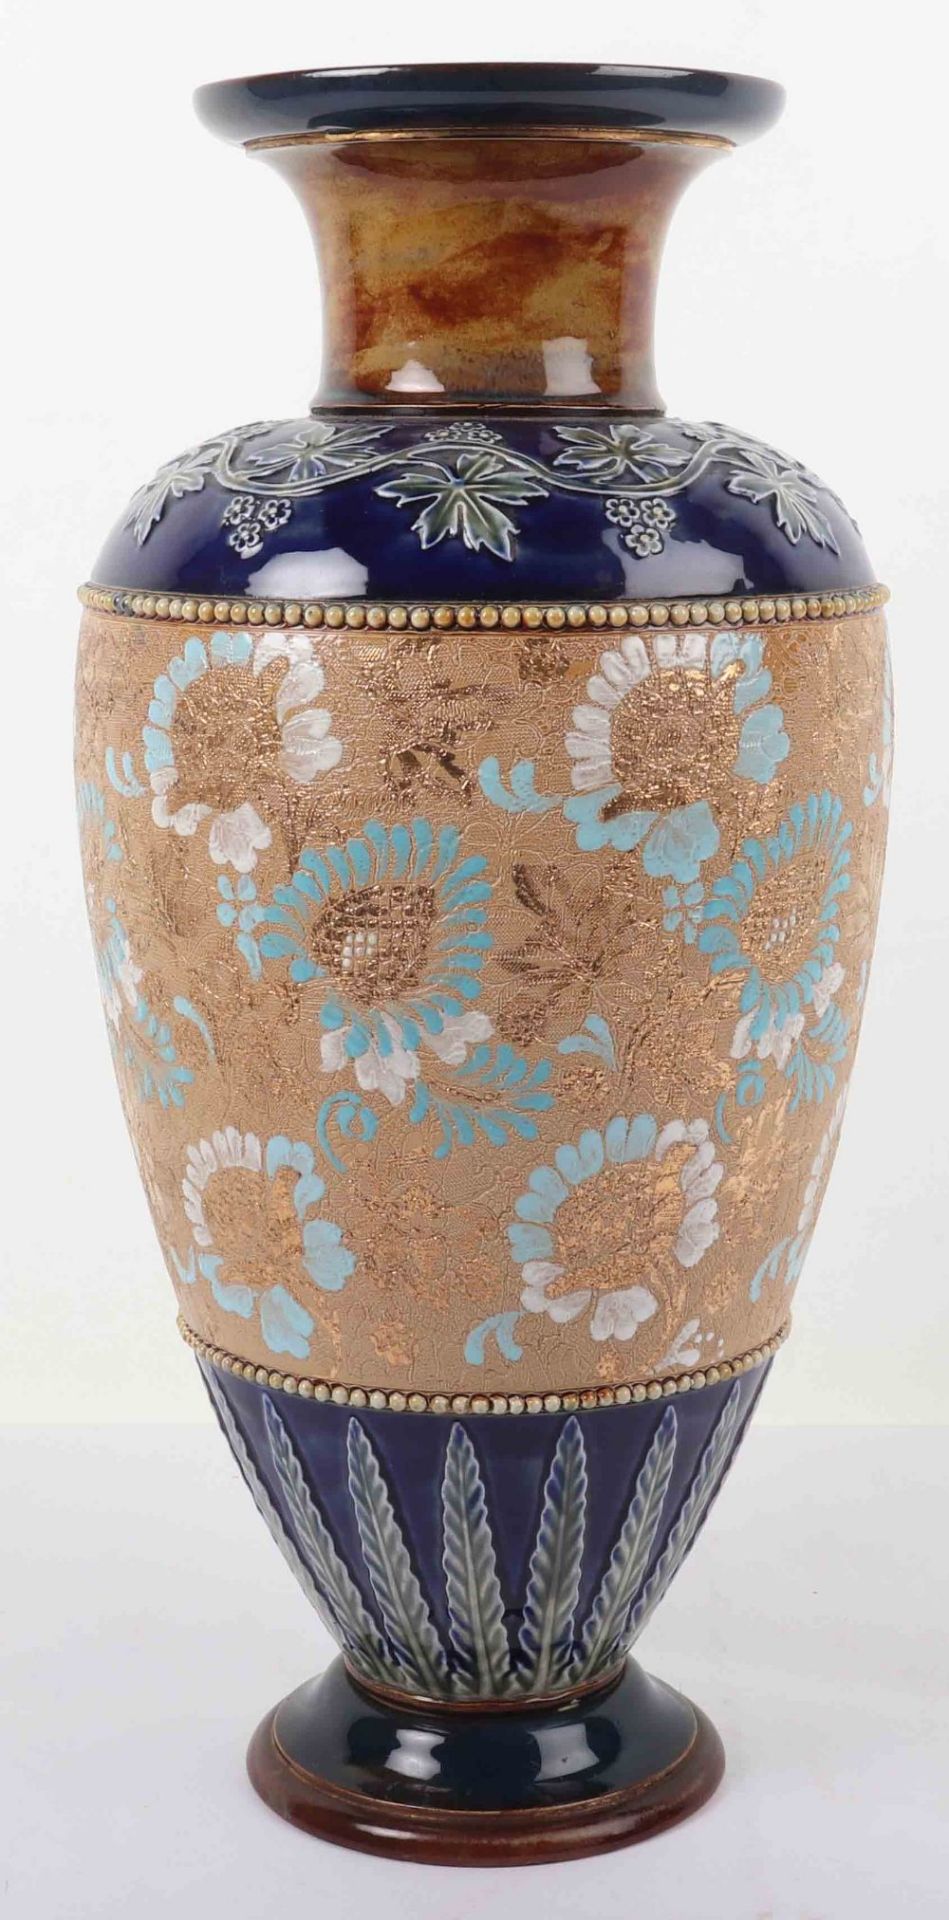 A Royal Doulton Slaters Patent vase - Image 3 of 10